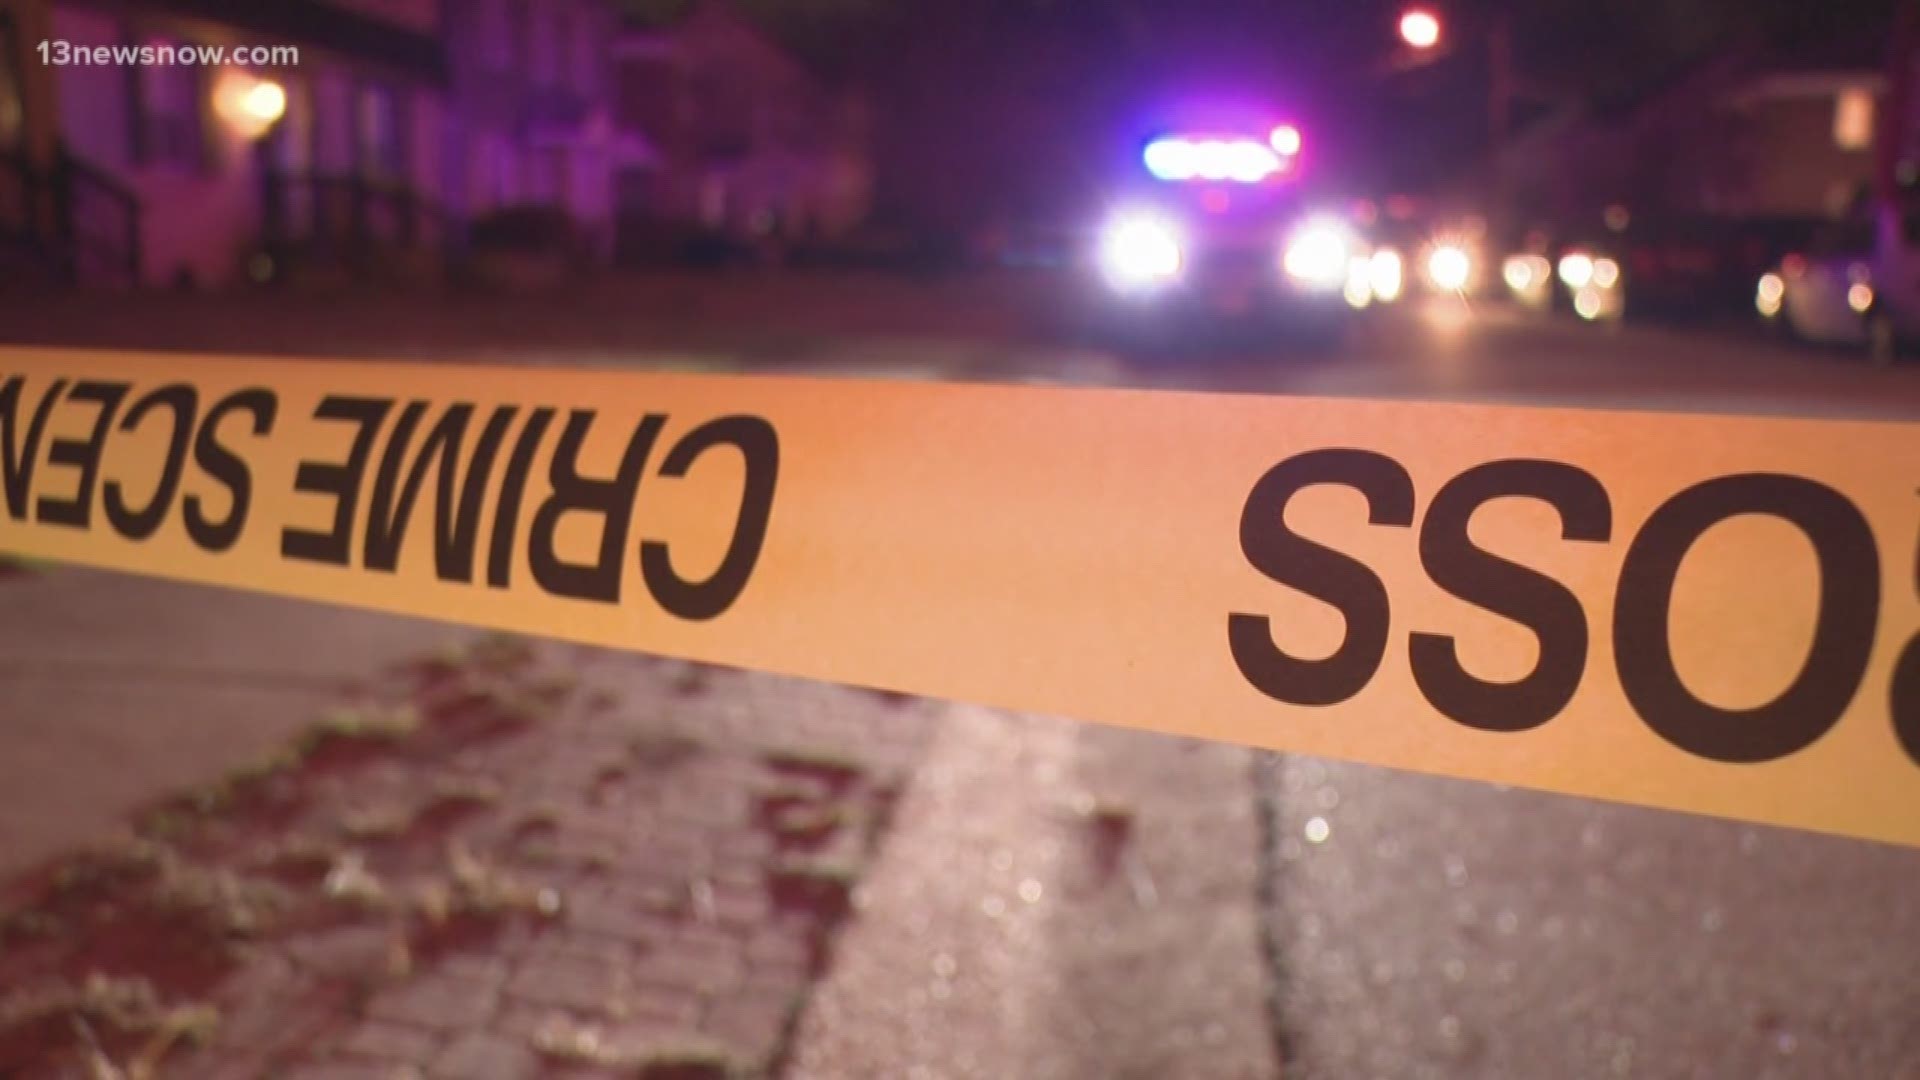 Police said they were investigating a home invasion that included a shooting Saturday night.